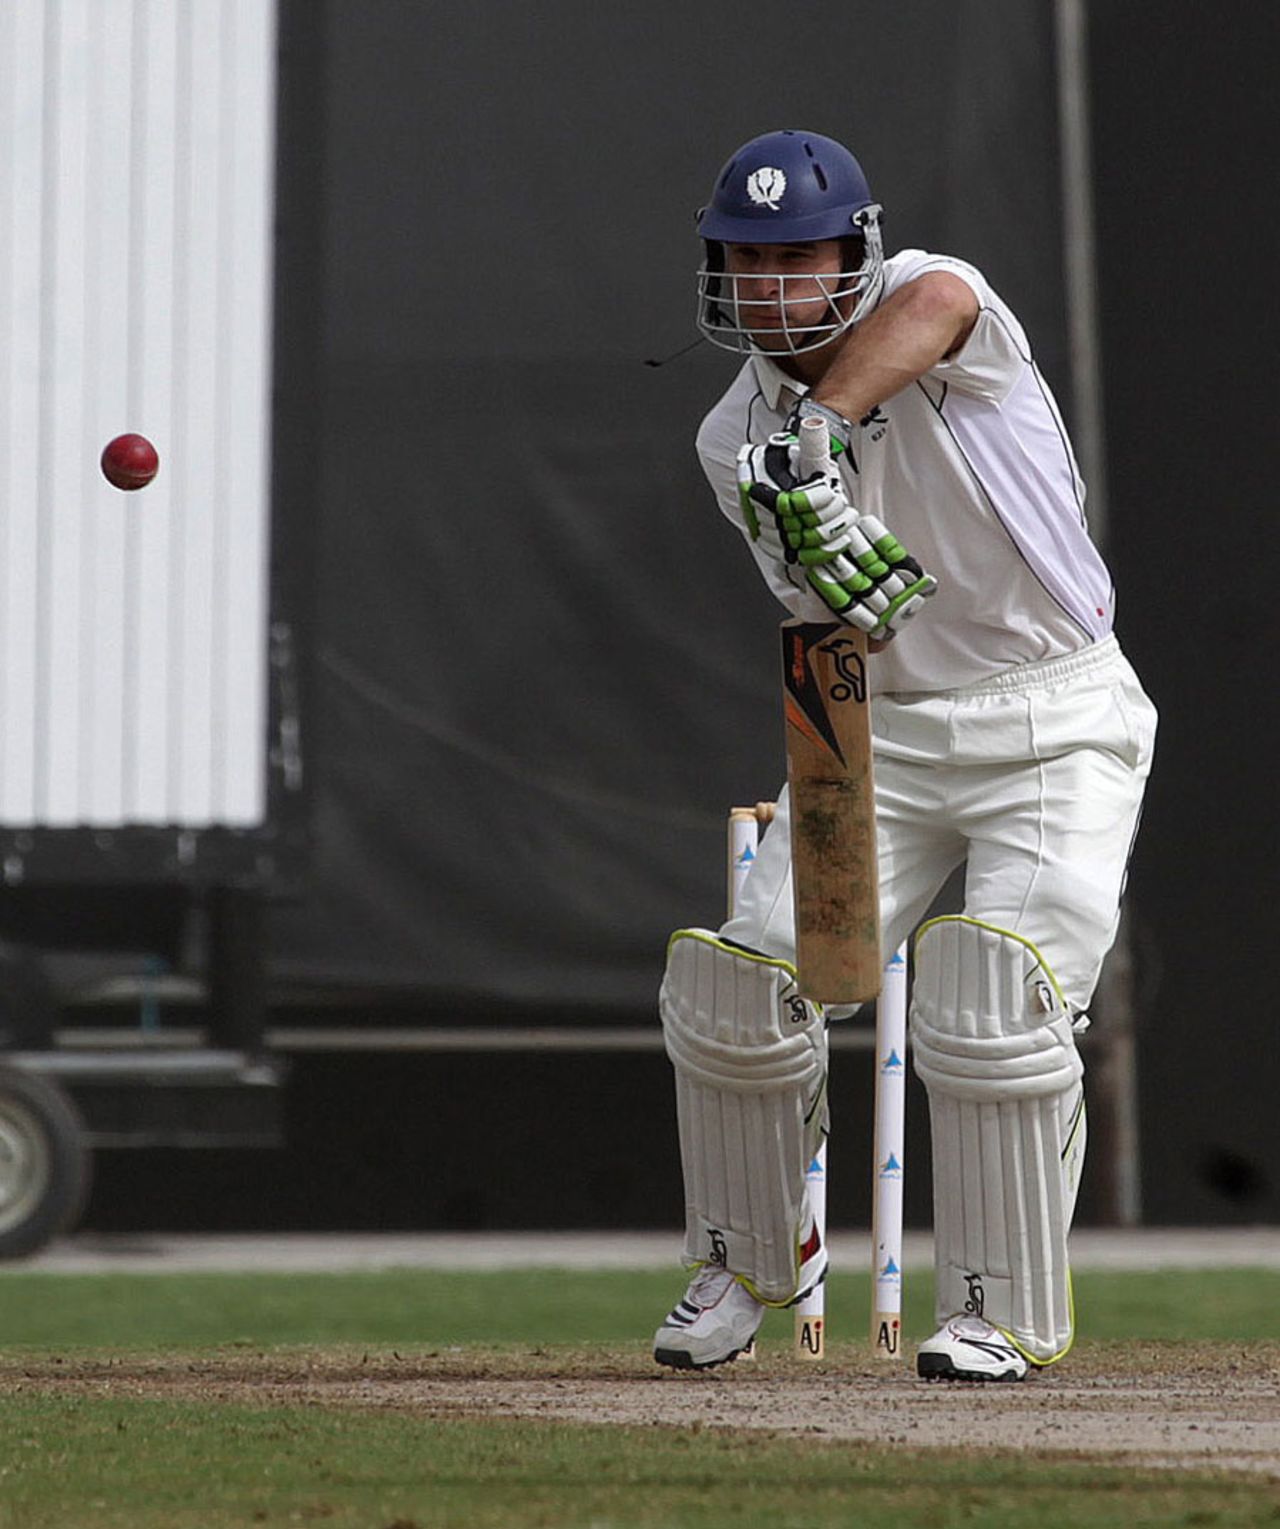 Simon Smith defends during his half-century, UAE v Scotland, Intercontinental Cup, 2nd day, Sharjah, February 17, 2012